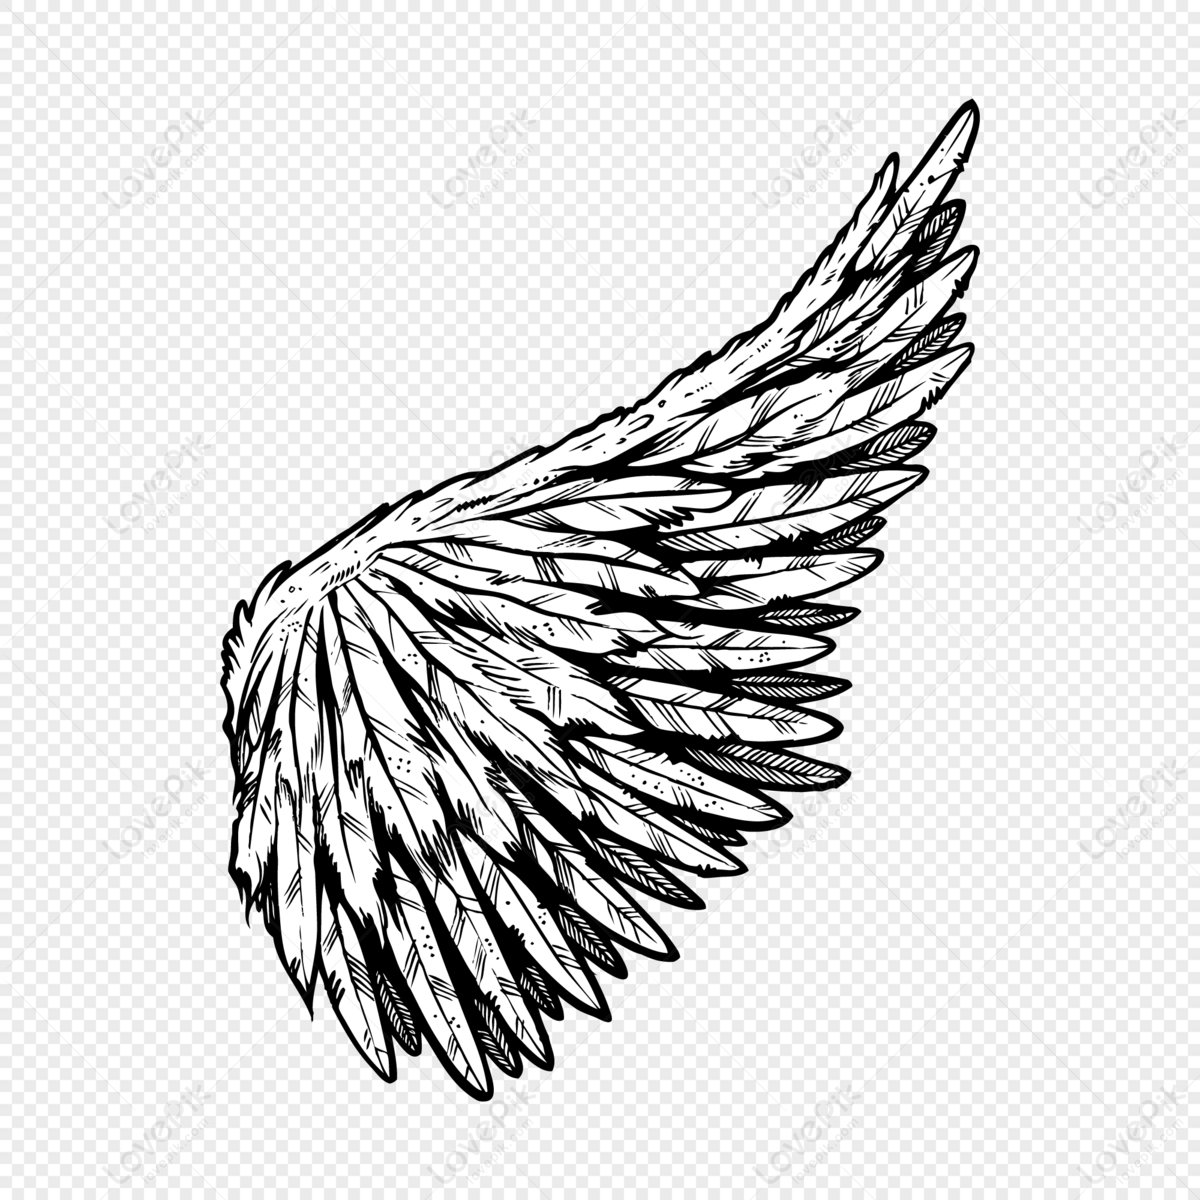 Gold Wings Vector PNG, Vector, PSD, and Clipart With Transparent Background  for Free Download